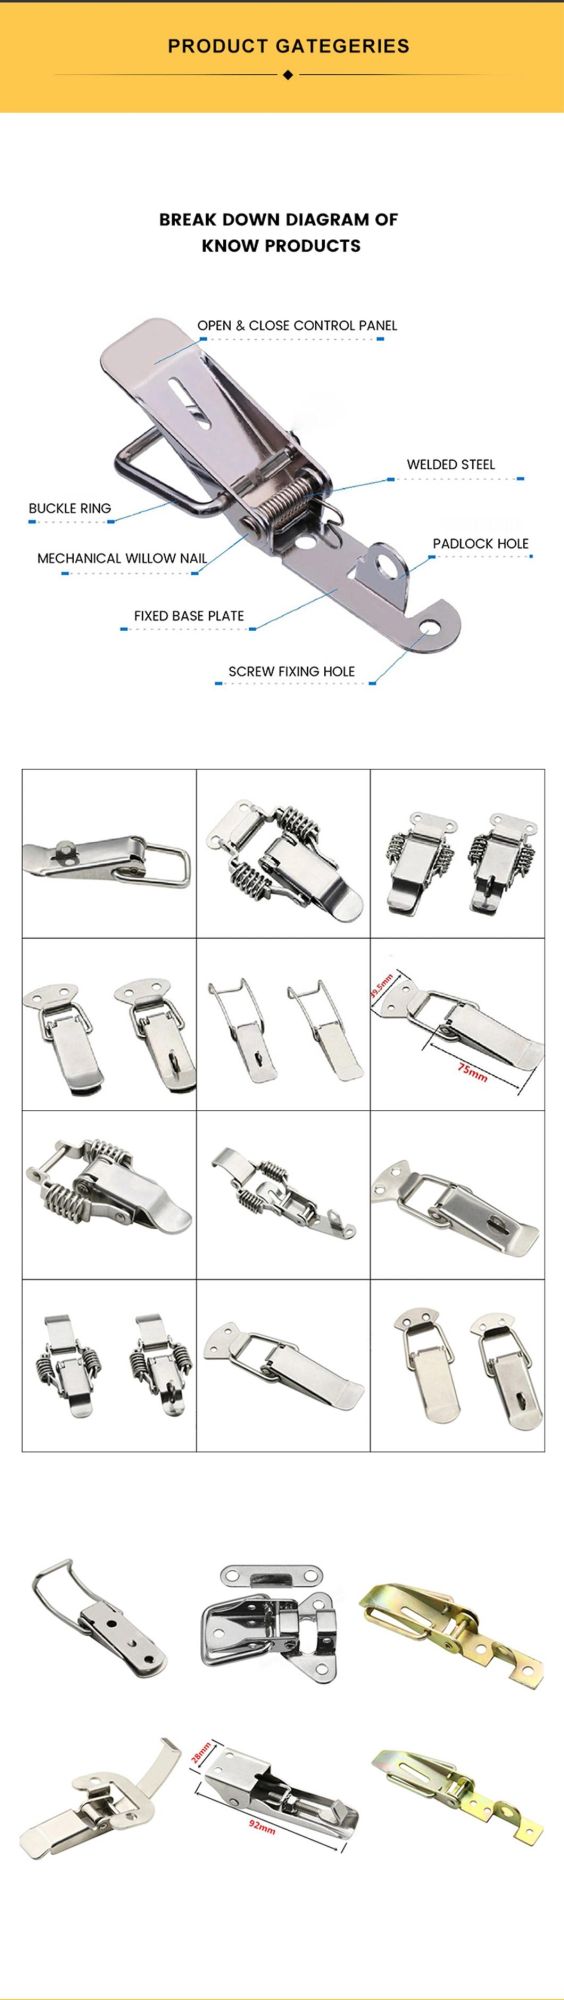 Recessed Steel Toggle Latch Clip U-Shackle Buckle Toggle Latch Clamp 1100lbs Stainless Steel Door Handle Latch